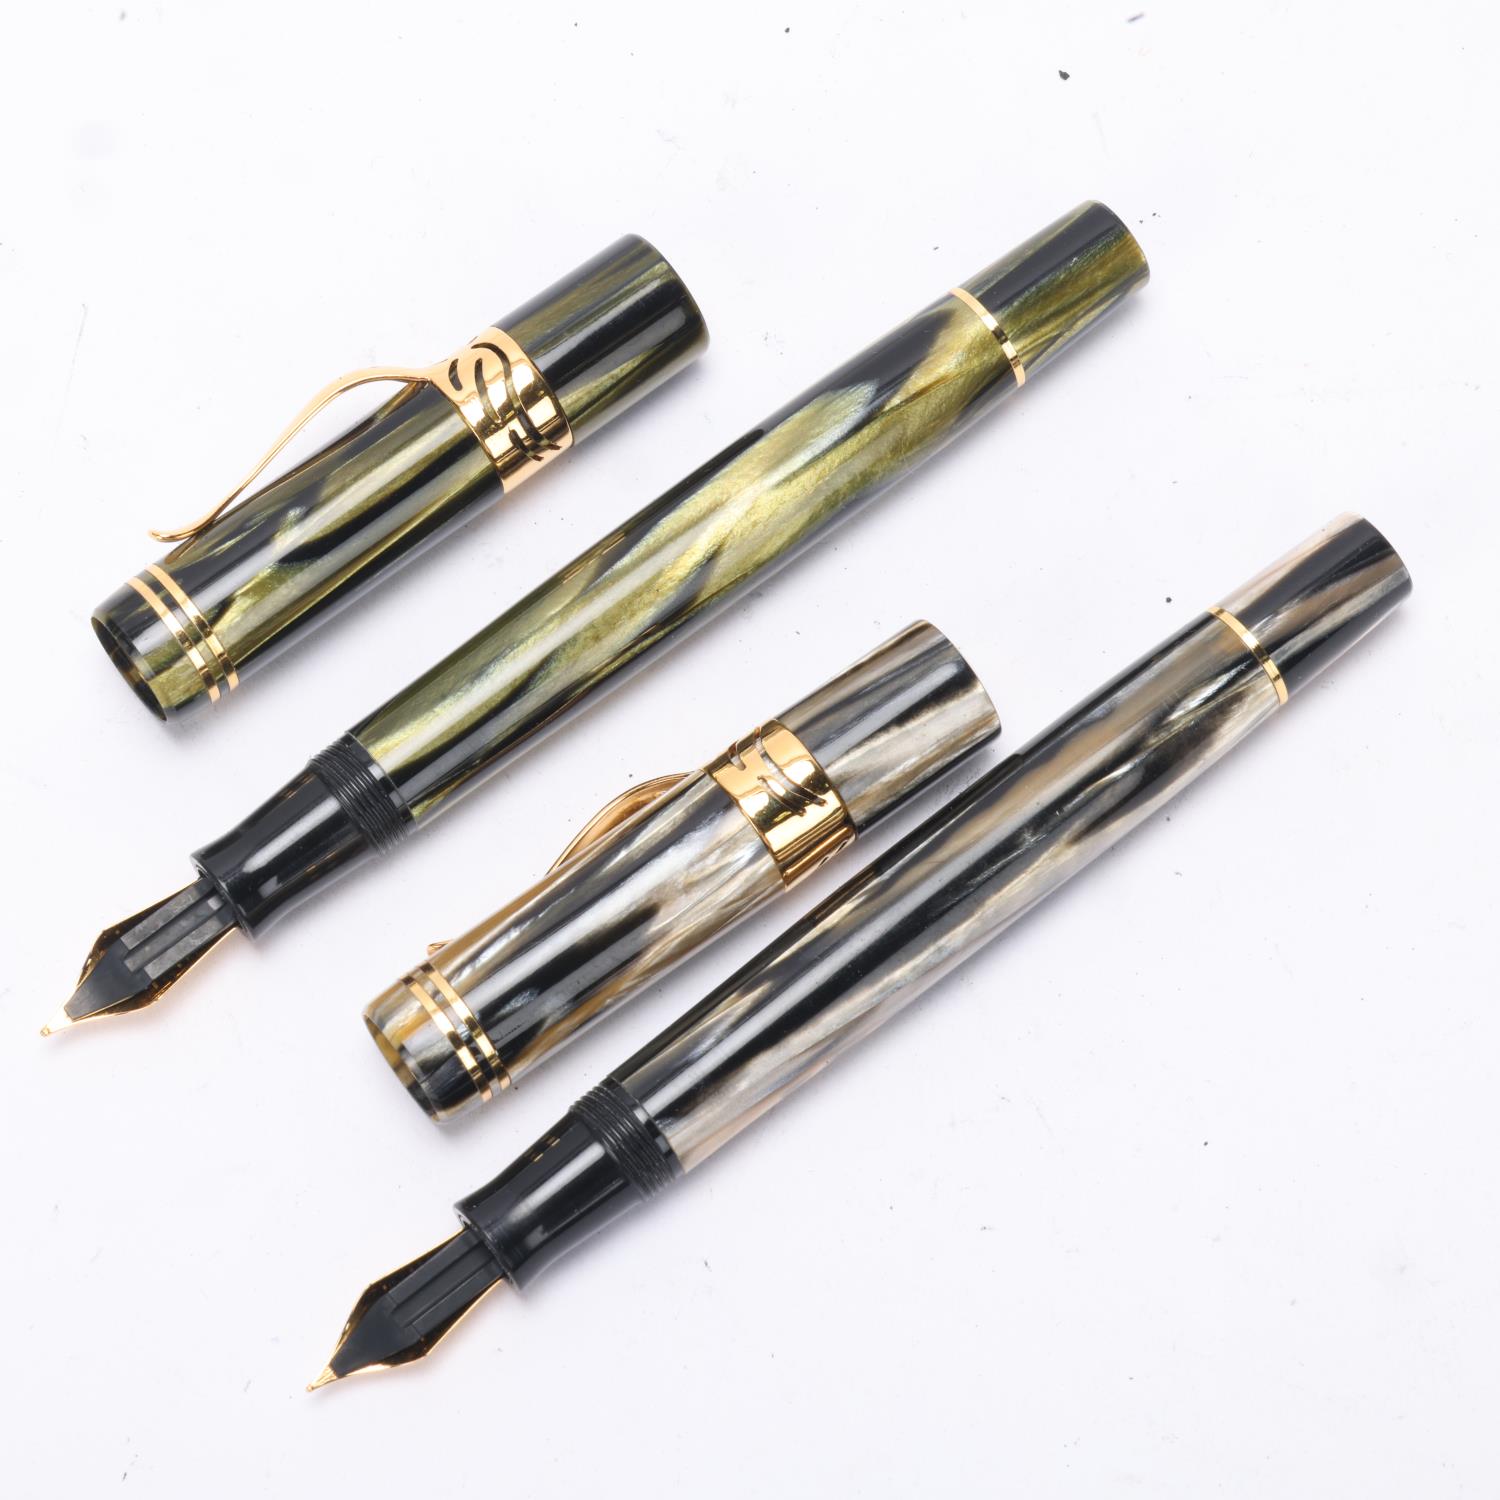 2 Visconti "Frederico II" fountain pens, piston fill with marbled body, limited edition of 800, both - Image 3 of 4